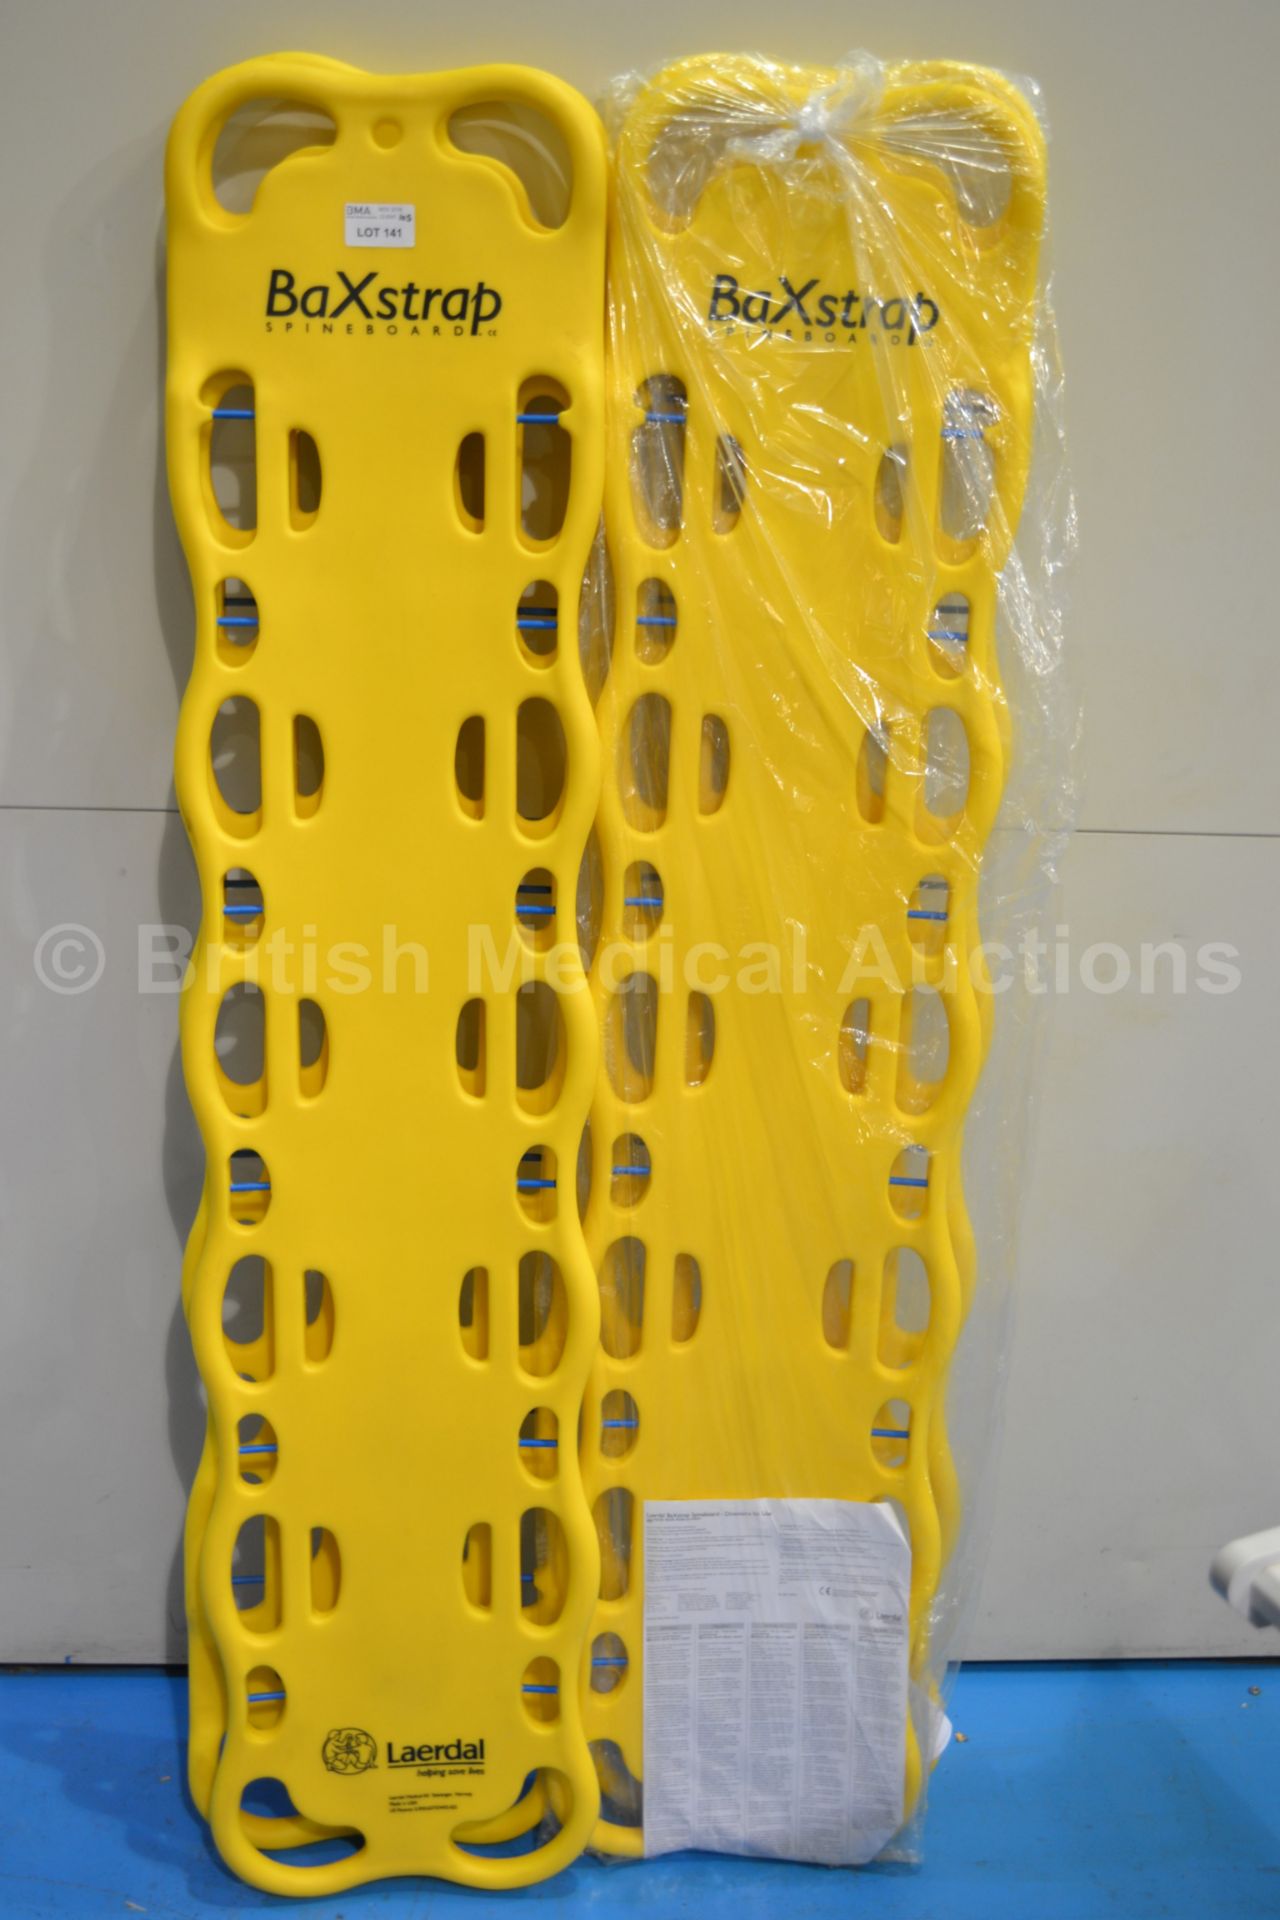 4 x Laerdal Baxstrap Spineboards - Image 2 of 2